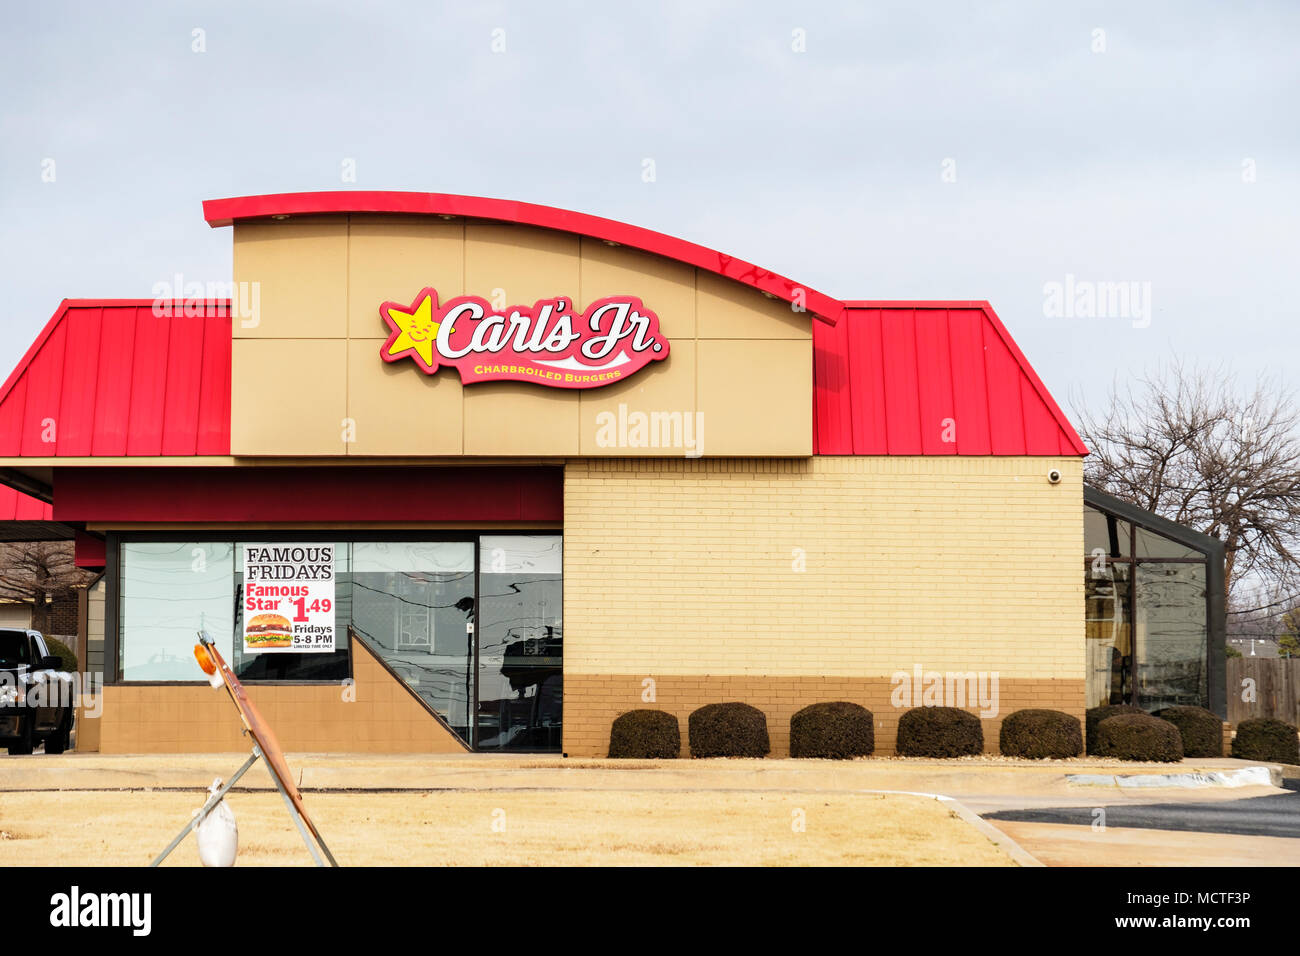 The storefront, or shop front, of a Carls Jr. hamburger and fast